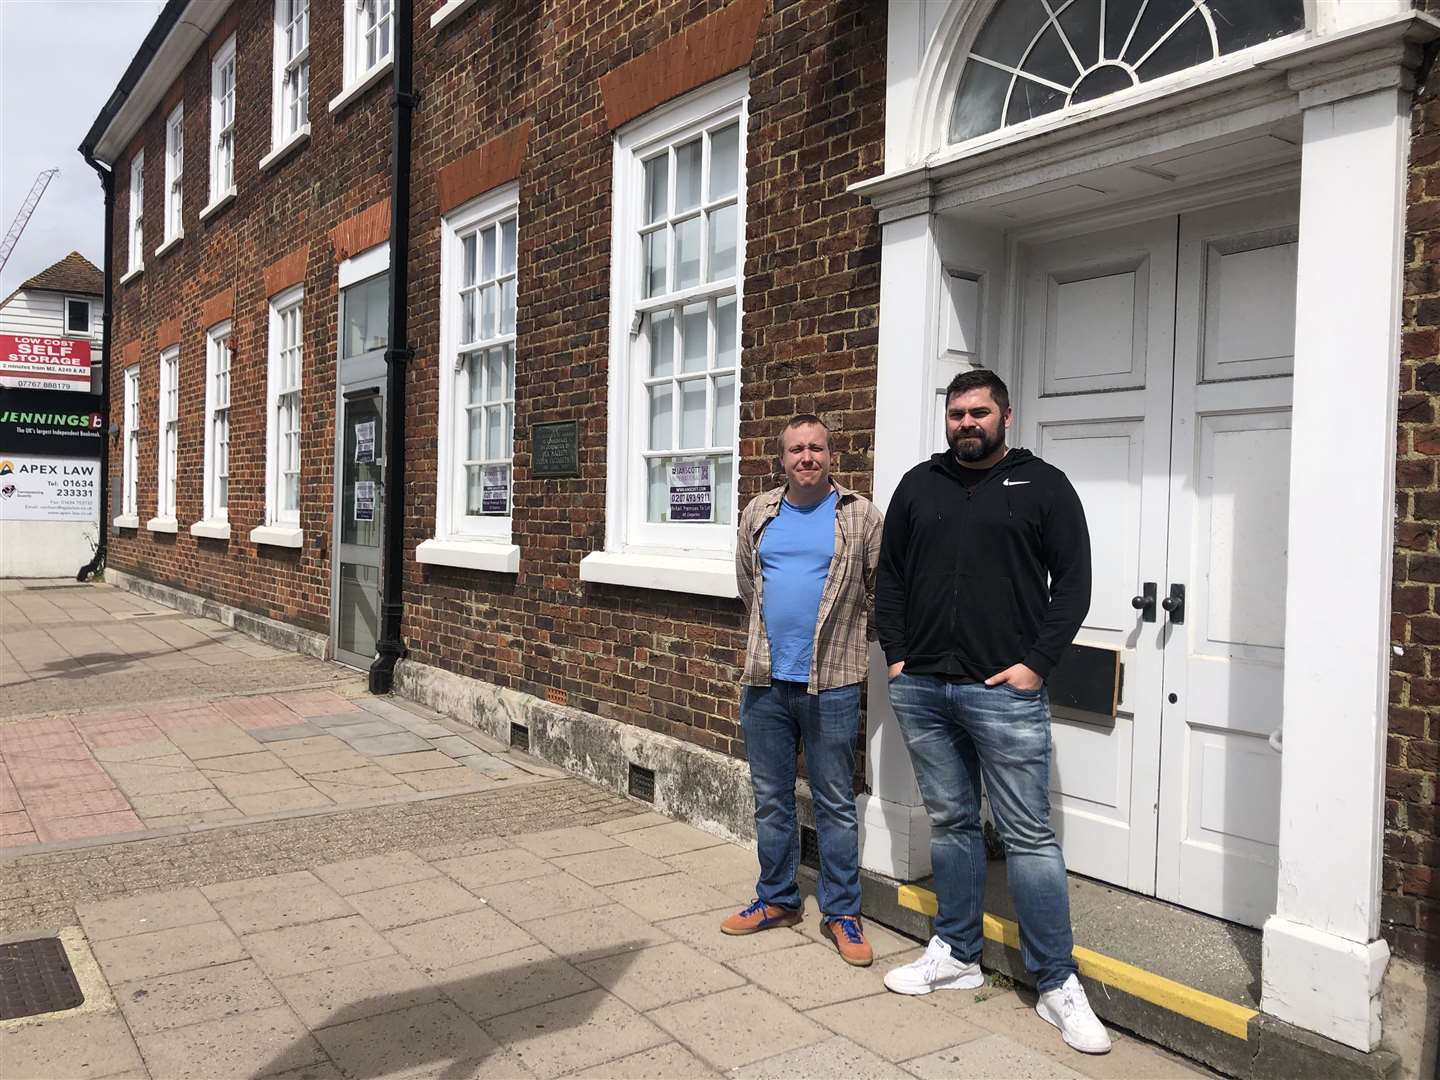 Tom Mudge and Jamie Clark, owners of the Dead Pigeon in Rochester, hope to open a new bar and restaurant at the former Barclays in Rainham High Street